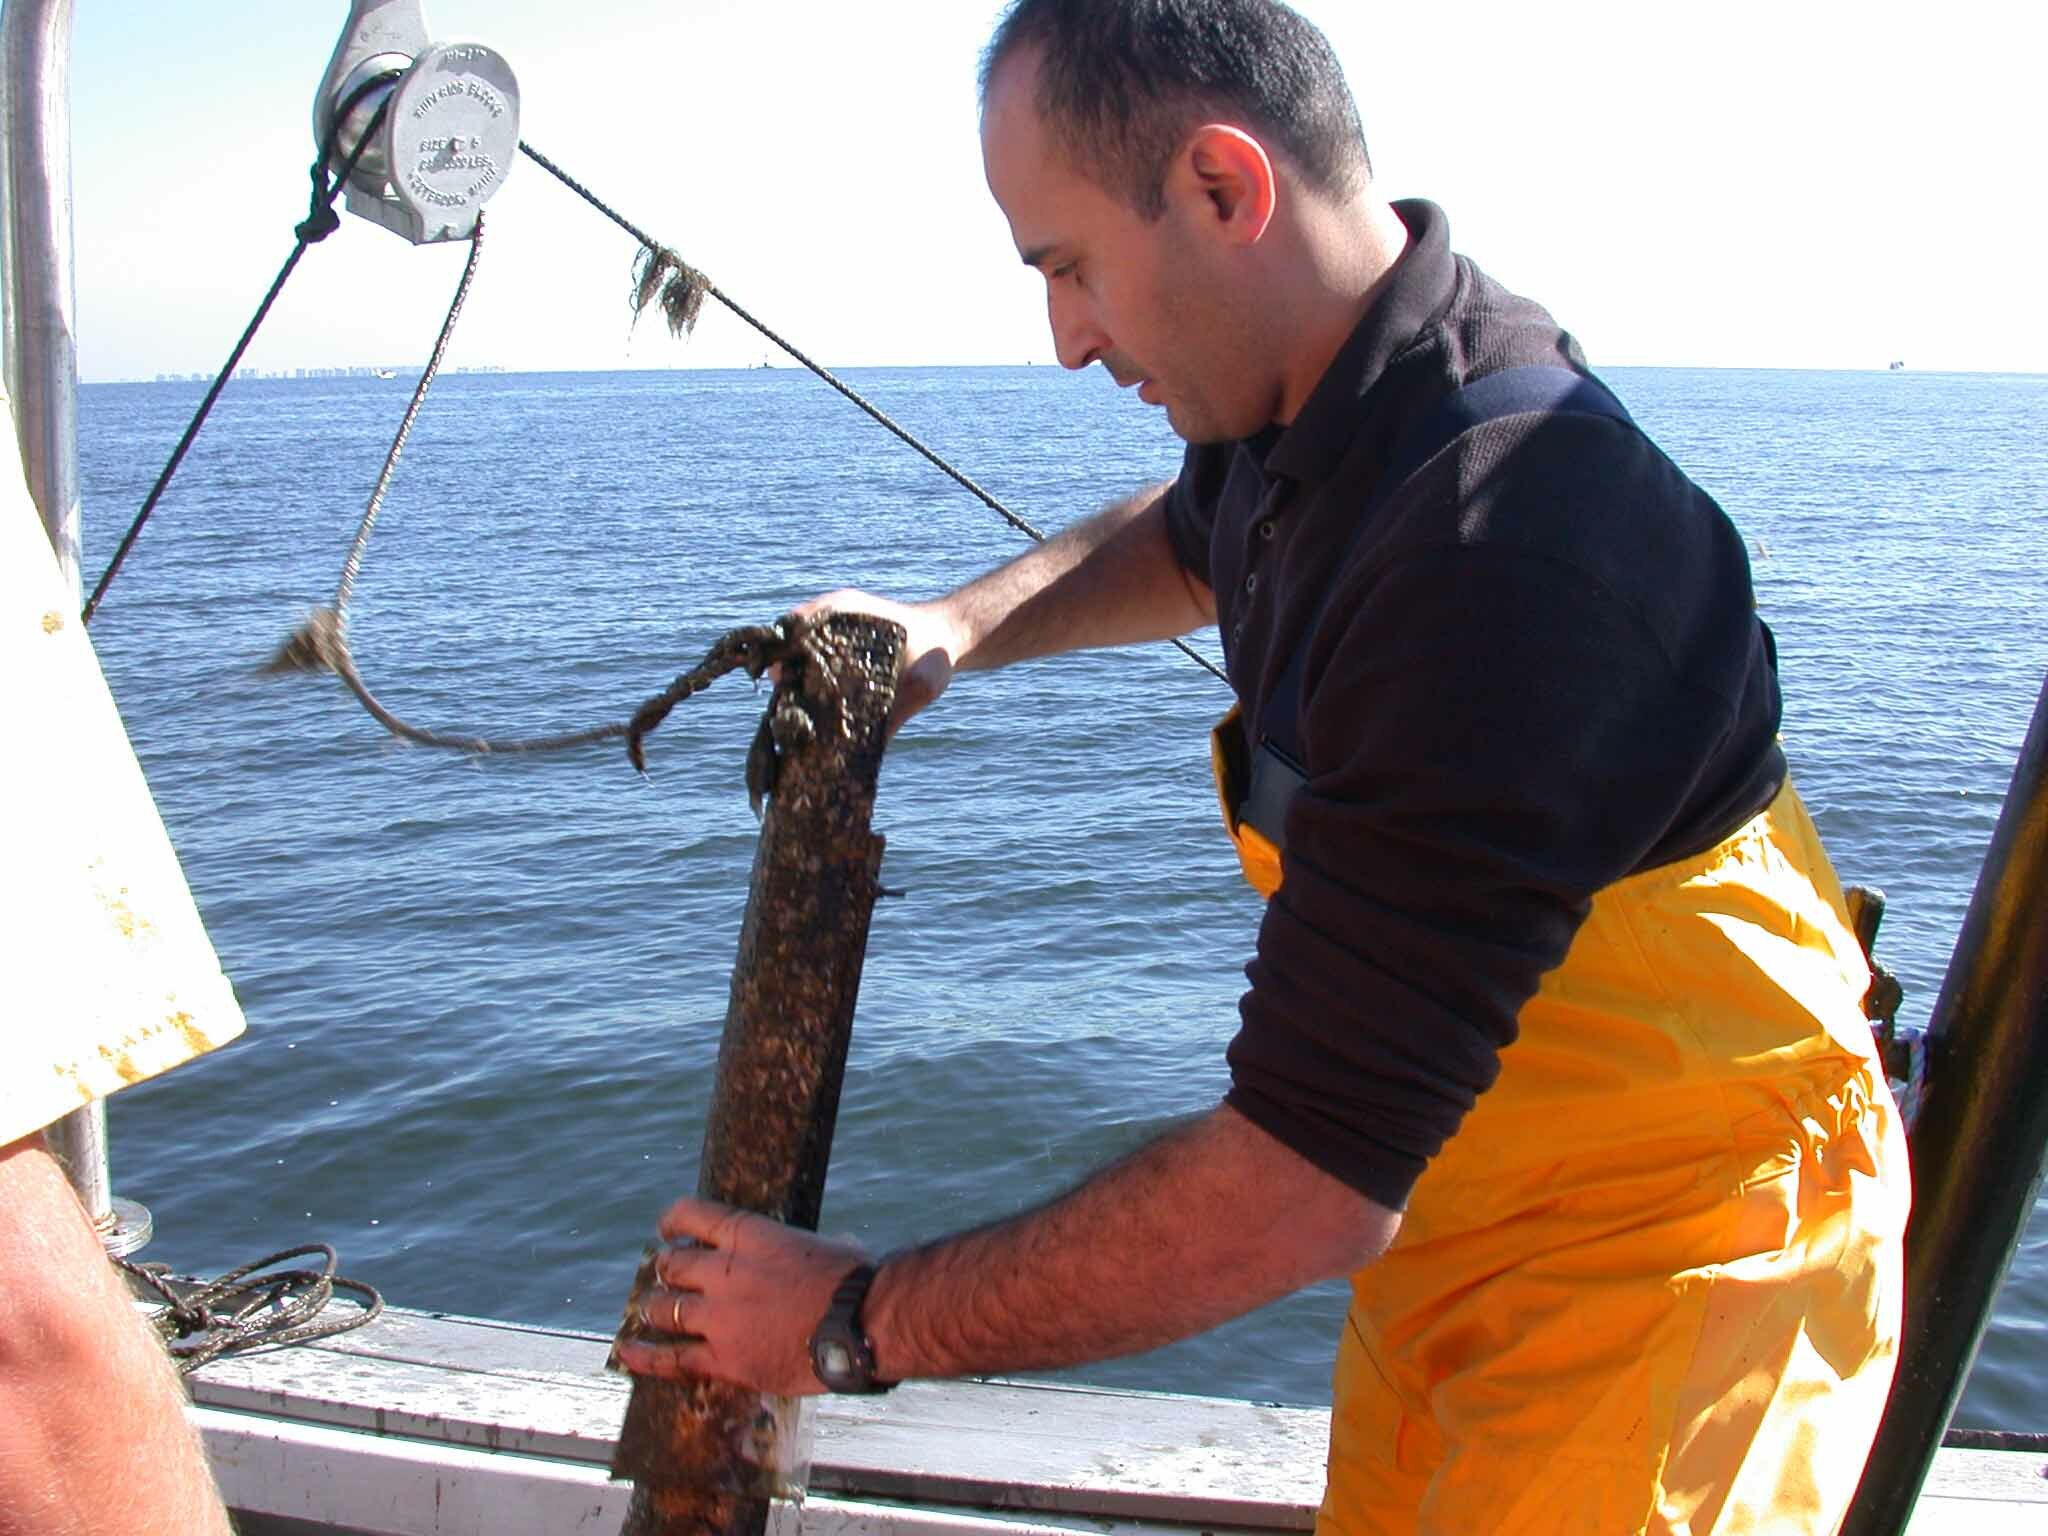 Stony Brook University professor Bassem Allam has received two grants for work on helping to determine if certain genetic traits could help scallops survive in warming water temperatures.